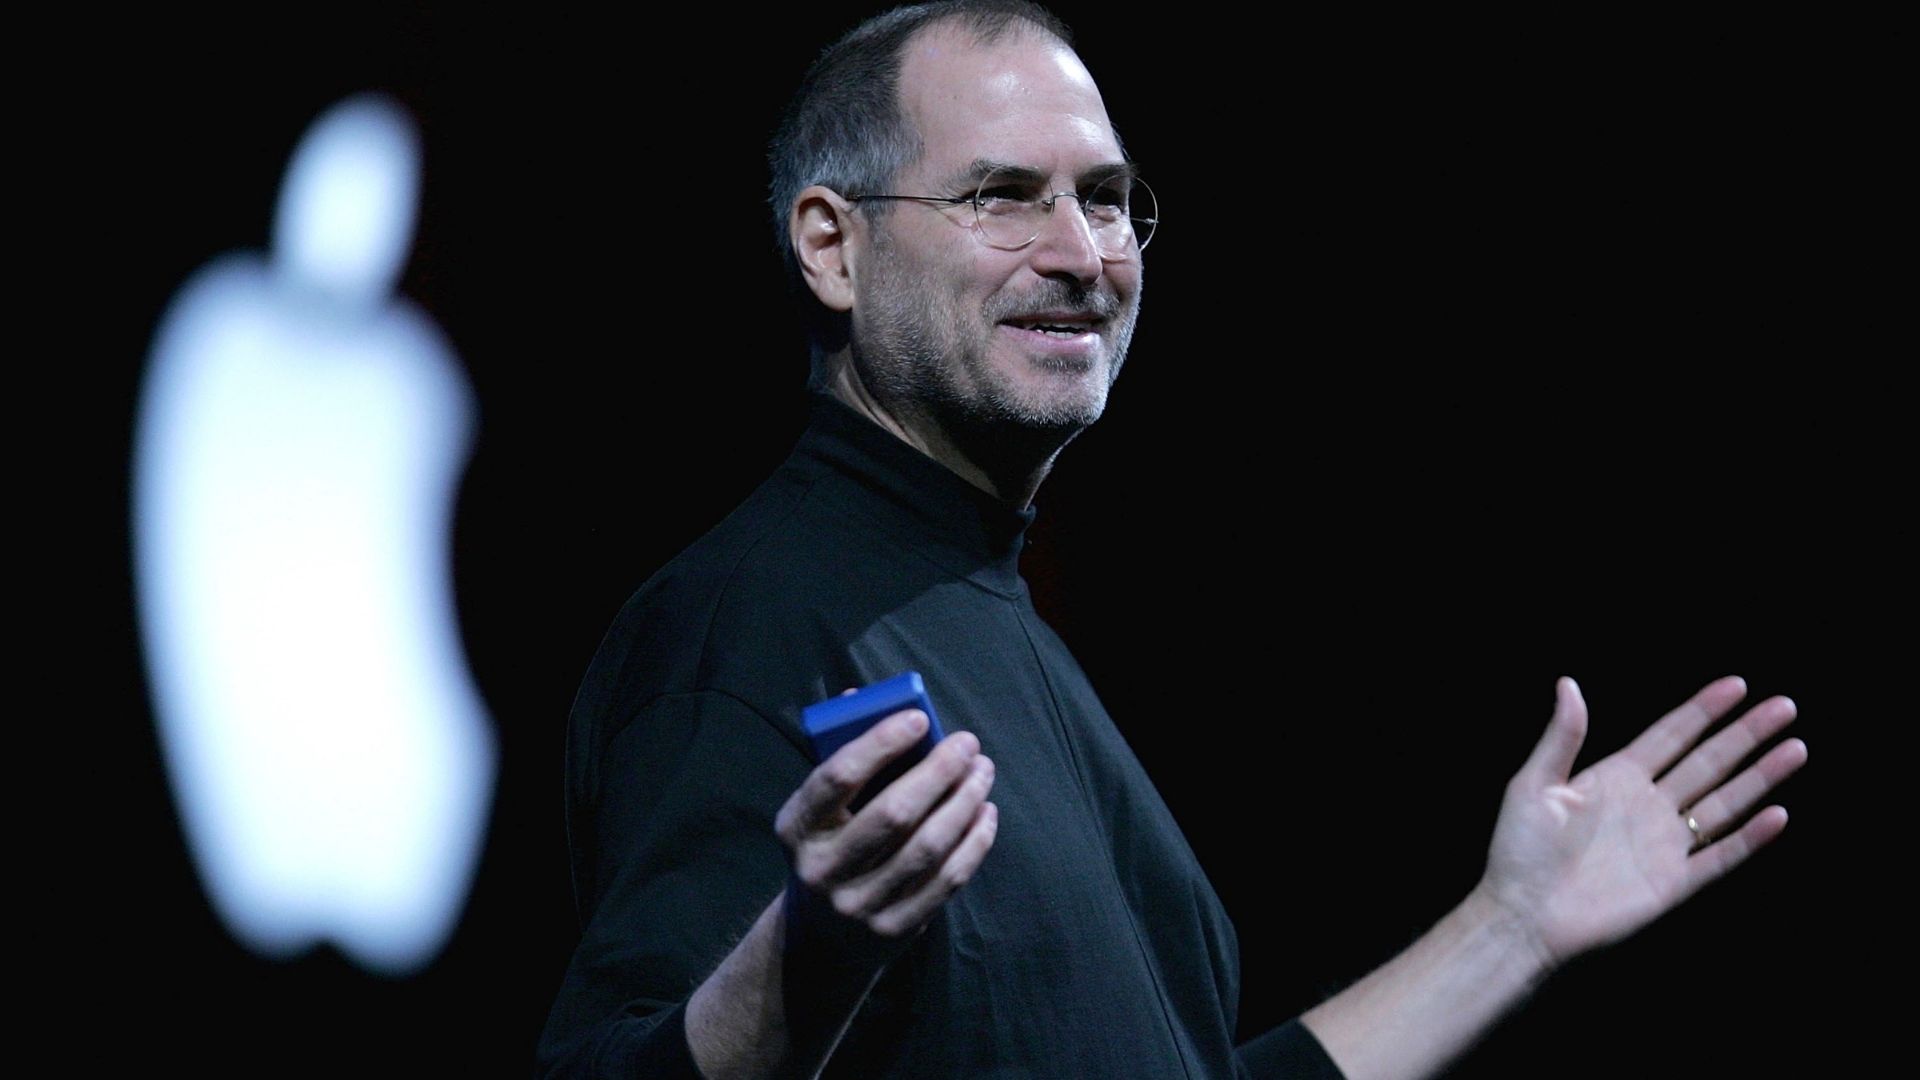 It would be best to hear the thoughts of Steve Jobs on marketing and we listed some of them in the article to point out his vision, and strategies.